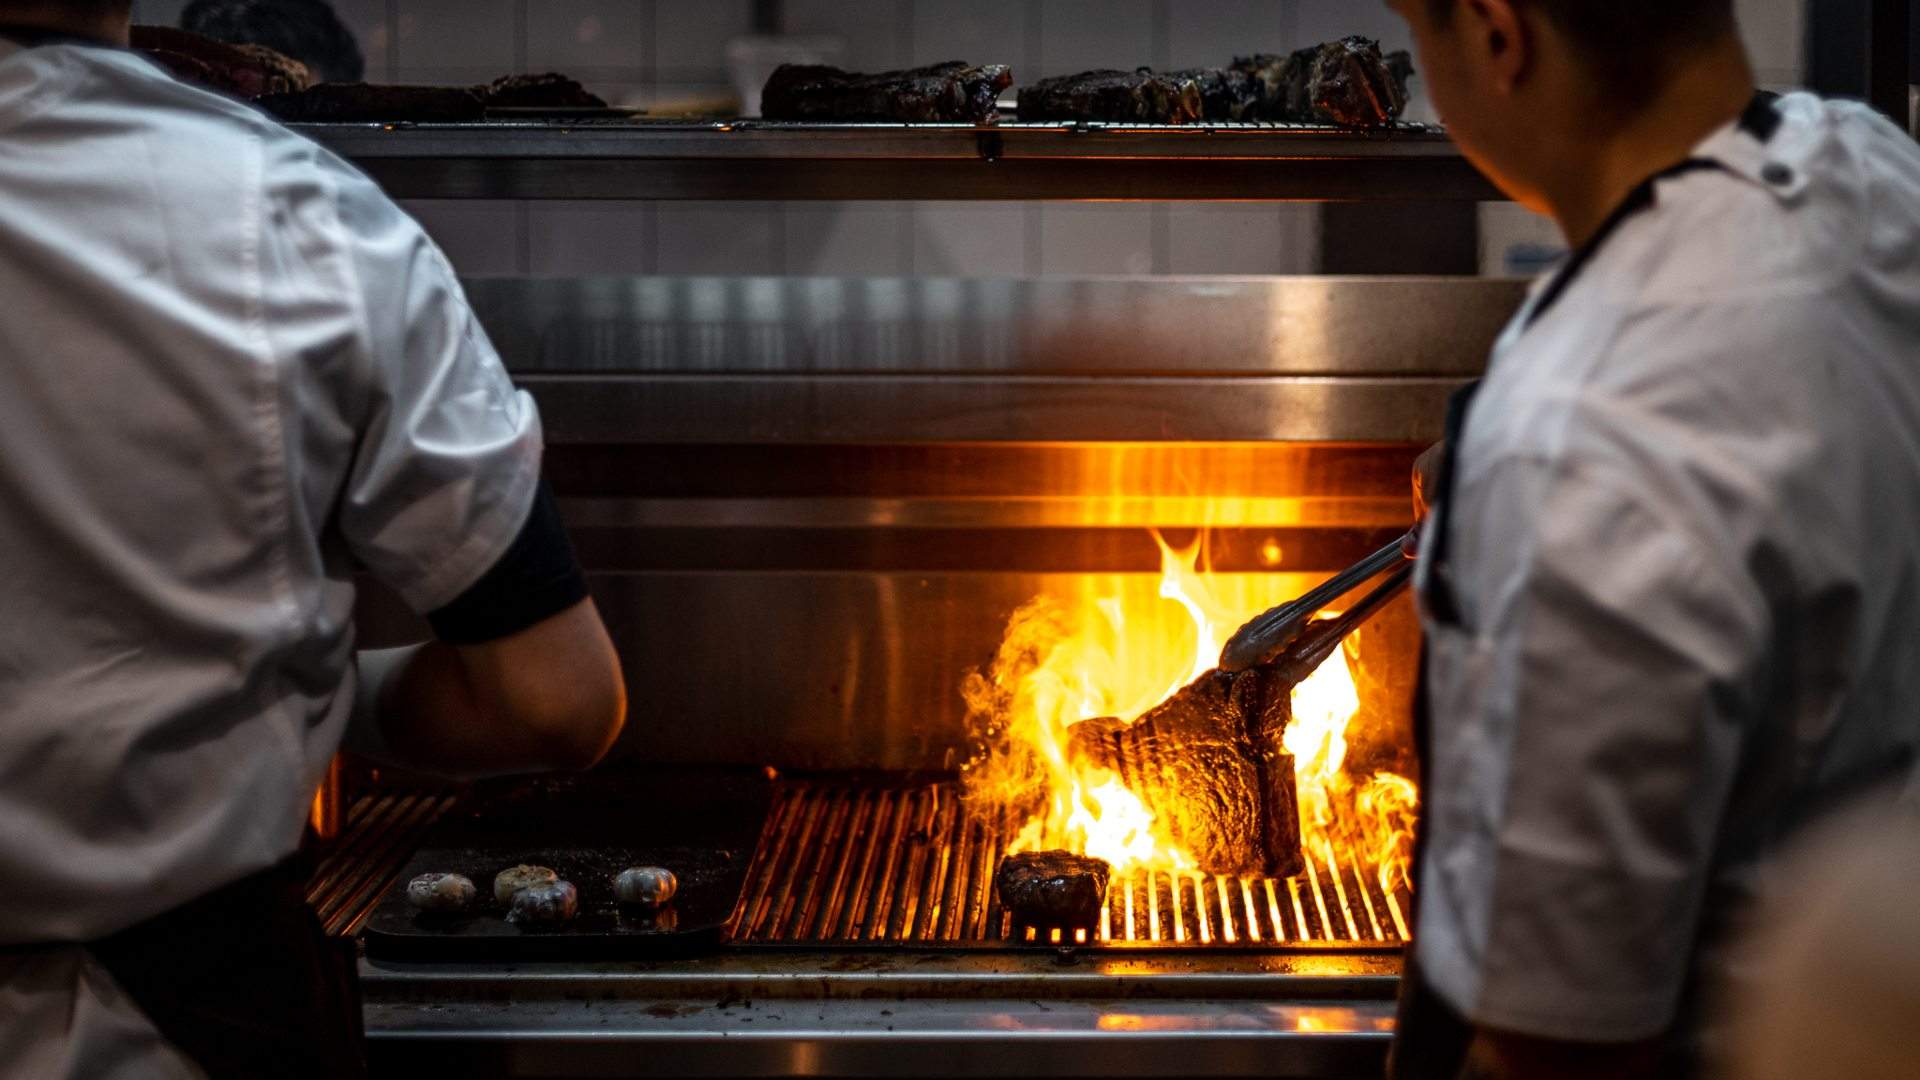 chefs cooking steaks over the fire grill at botswana butchery and grill - home to some of the best steaks in sydney